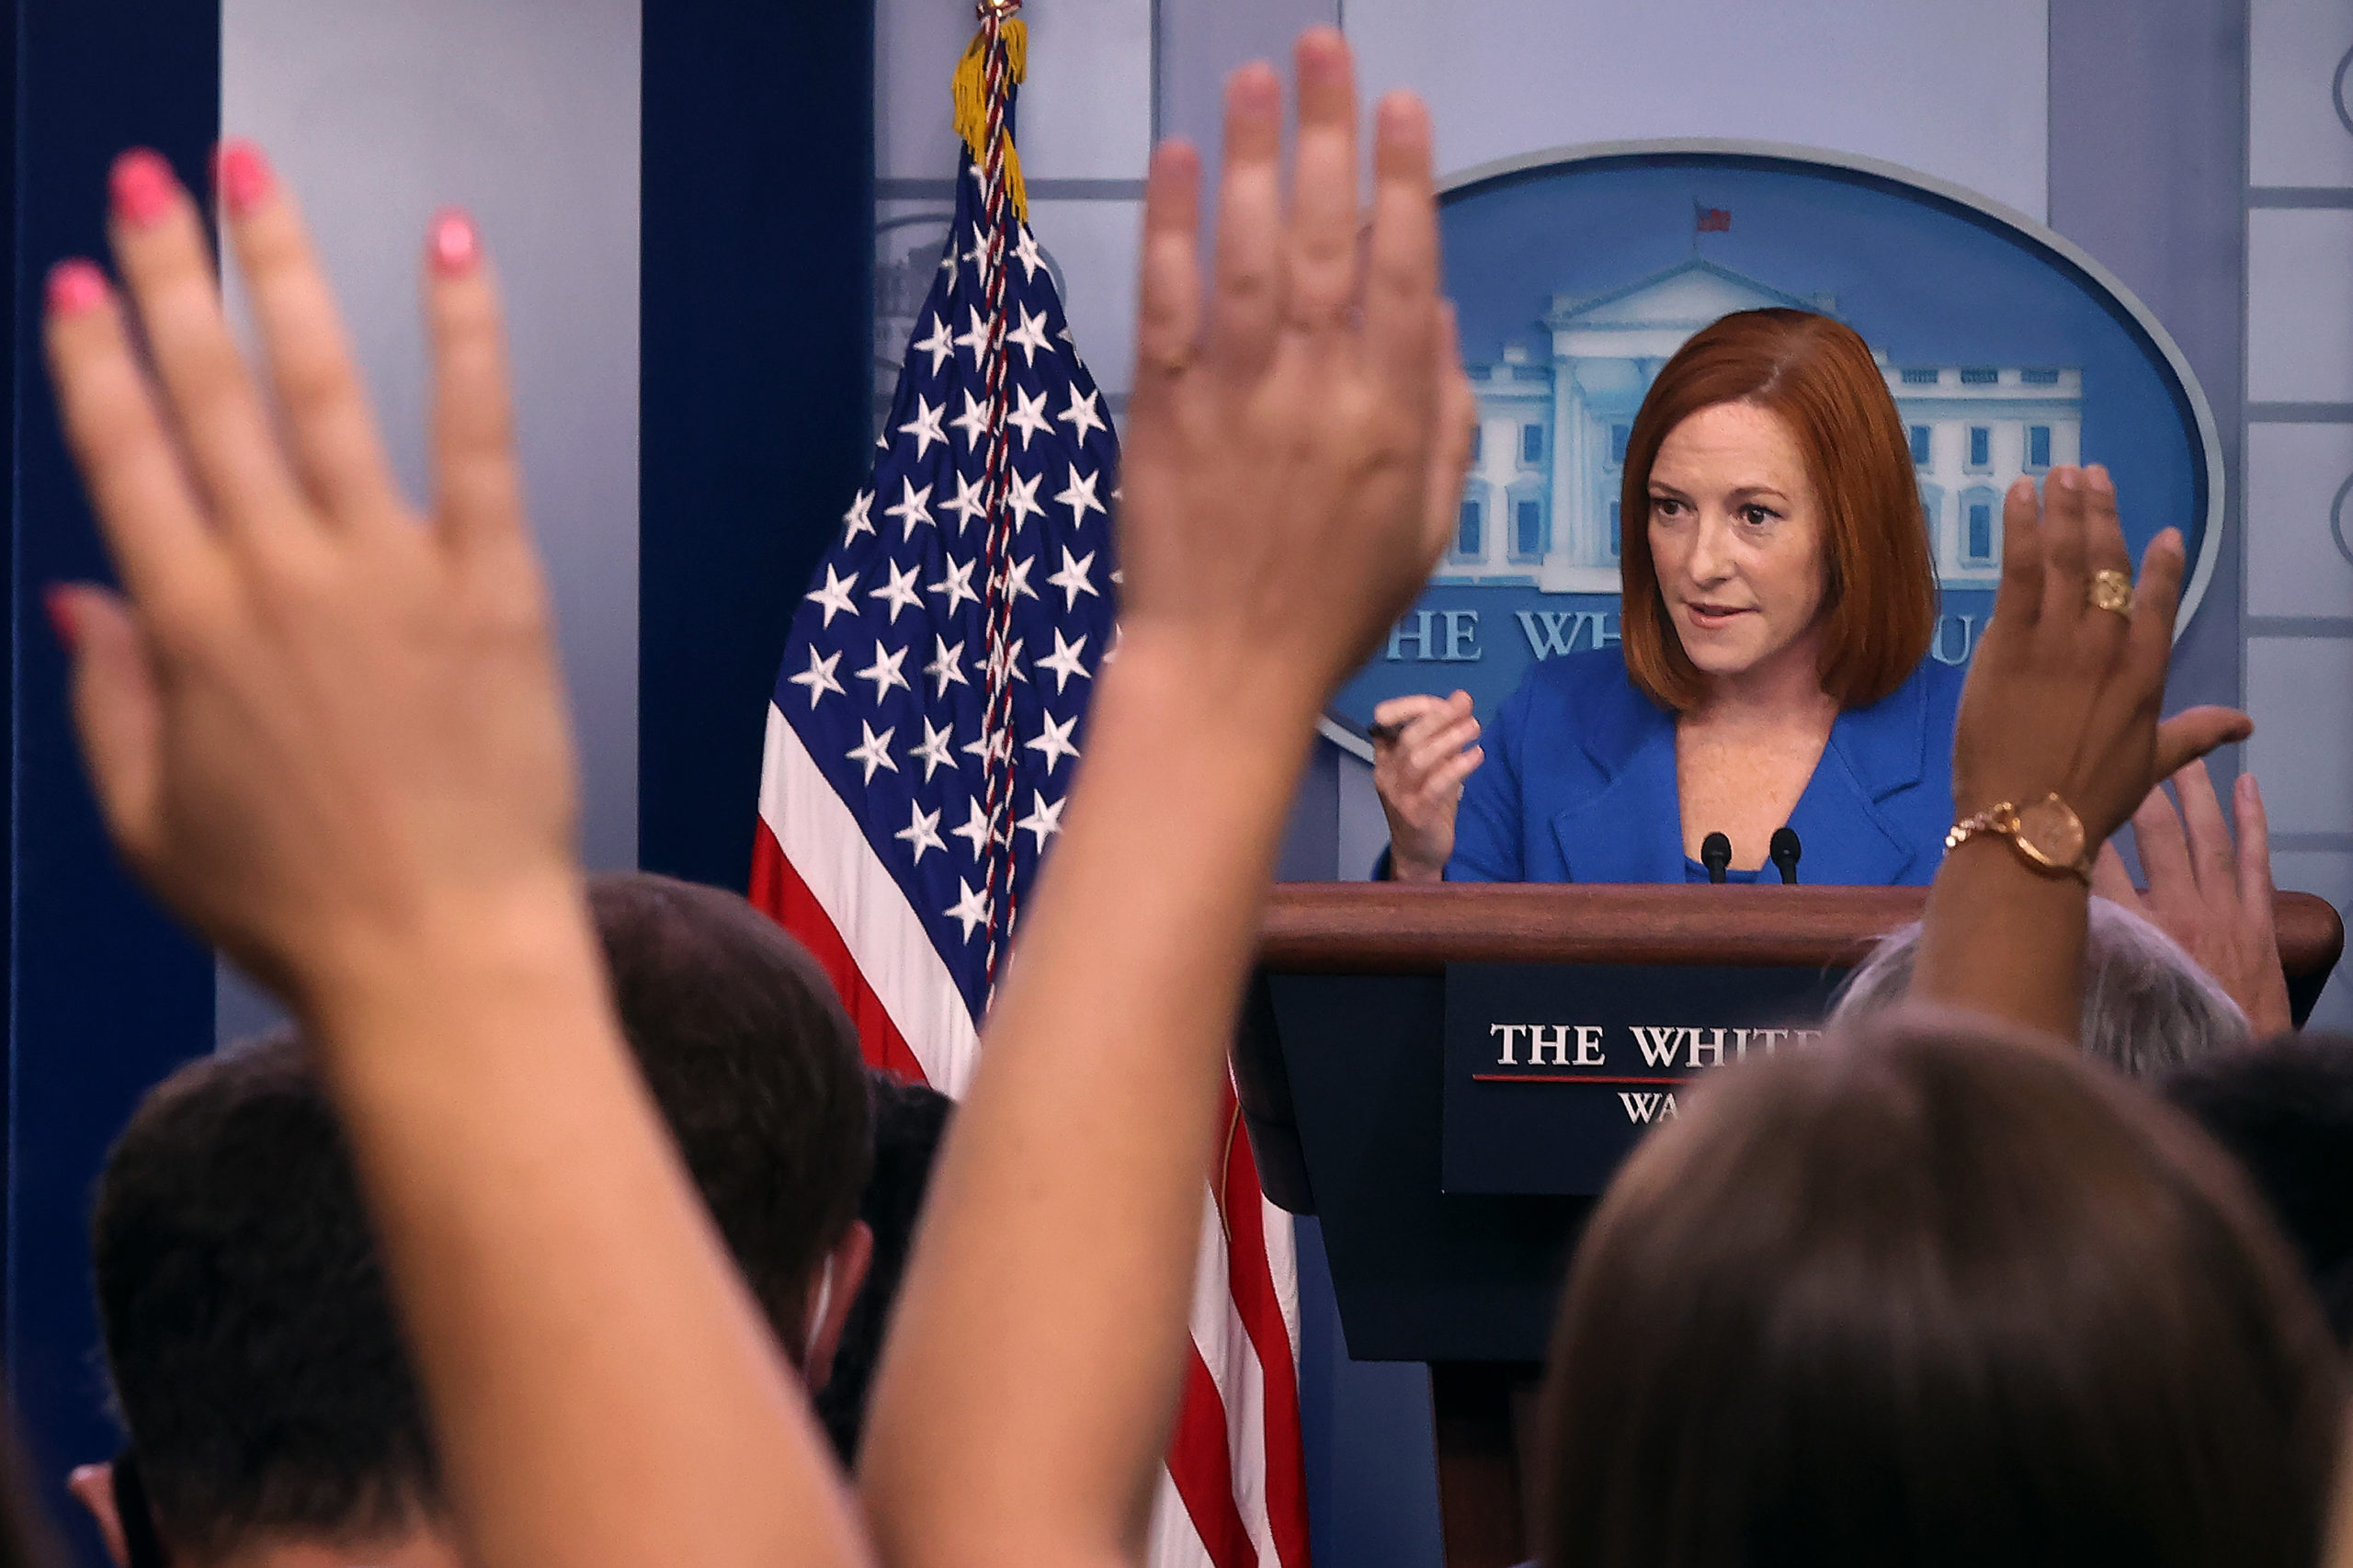 WASHINGTON, DC - AUGUST 31: White House Press Secretary Jen Psaki talks to reporters during the daily news conference in the Brady Press Briefing Room at the White House on August 31, 2021 in Washington, DC. Coming on the heels of President Joe Biden's speech about the withdrawal of military forces from Afghanistan, Psaki's news conference included questions related to the Taliban takeover of the country. (Photo by Chip Somodevilla/Getty Images)